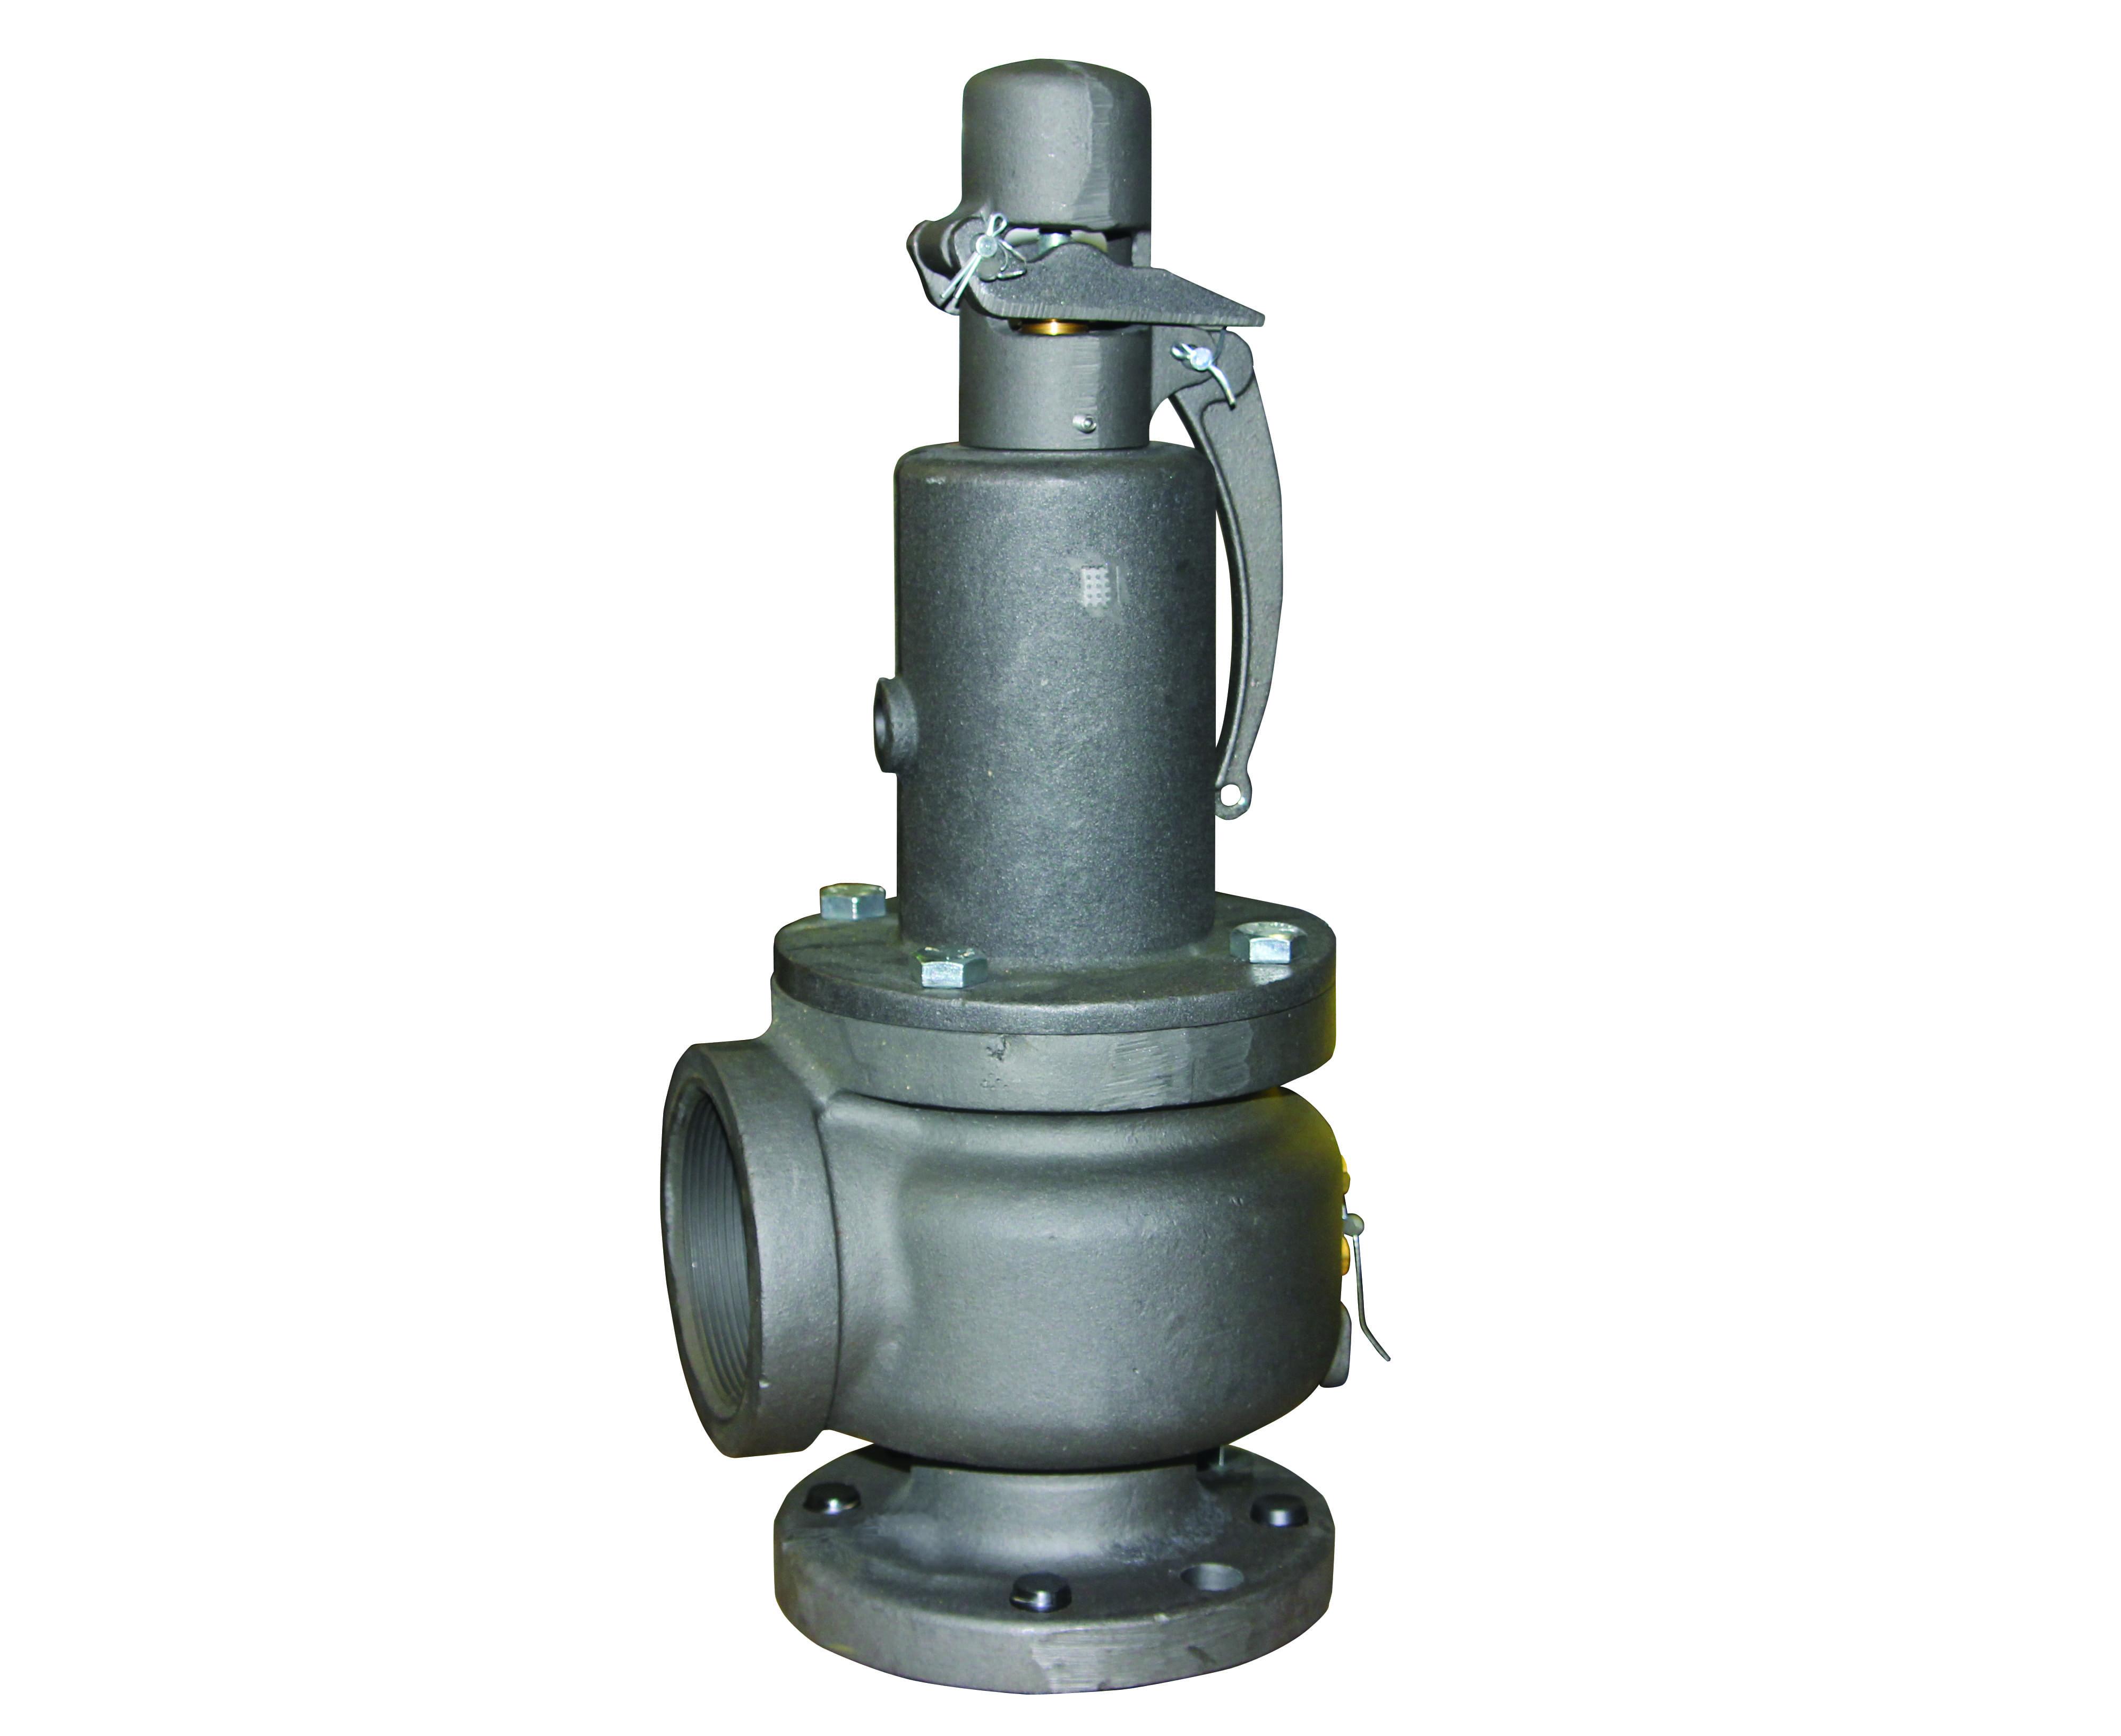 Preview image for Apollo ASME Section I Steam Cast Iron Safety Relief Valve, 3" X 4" (2 x FNPT)